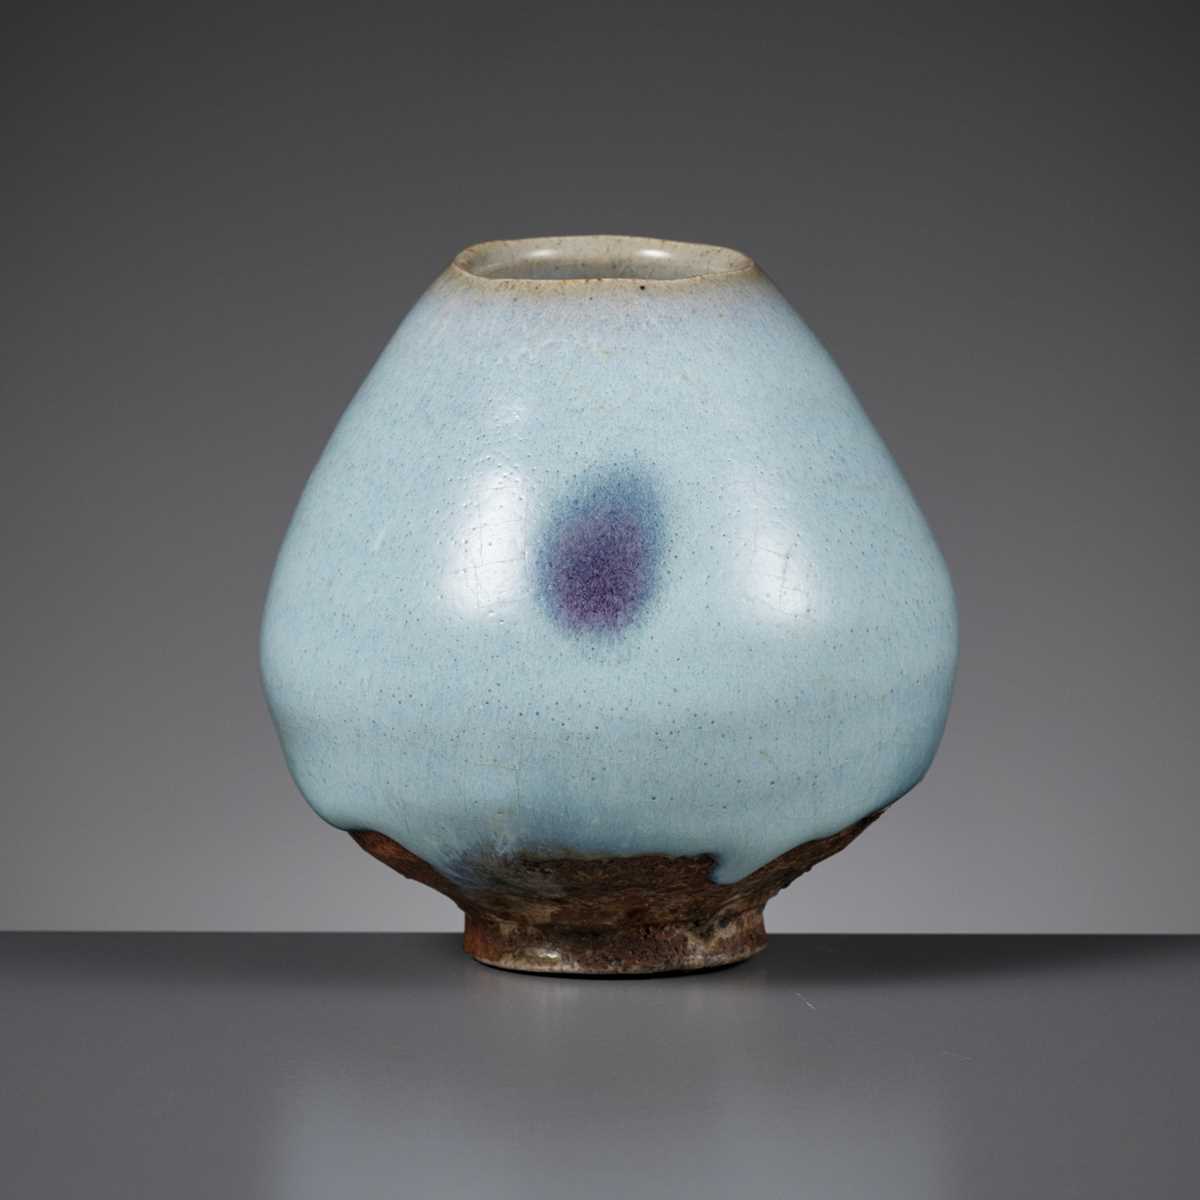 Lot 74 - A SMALL JUNYAO PURPLE-SPLASHED ‘LOTUS BUD’ WATERPOT, NORTHERN SONG OR JIN DYNASTY